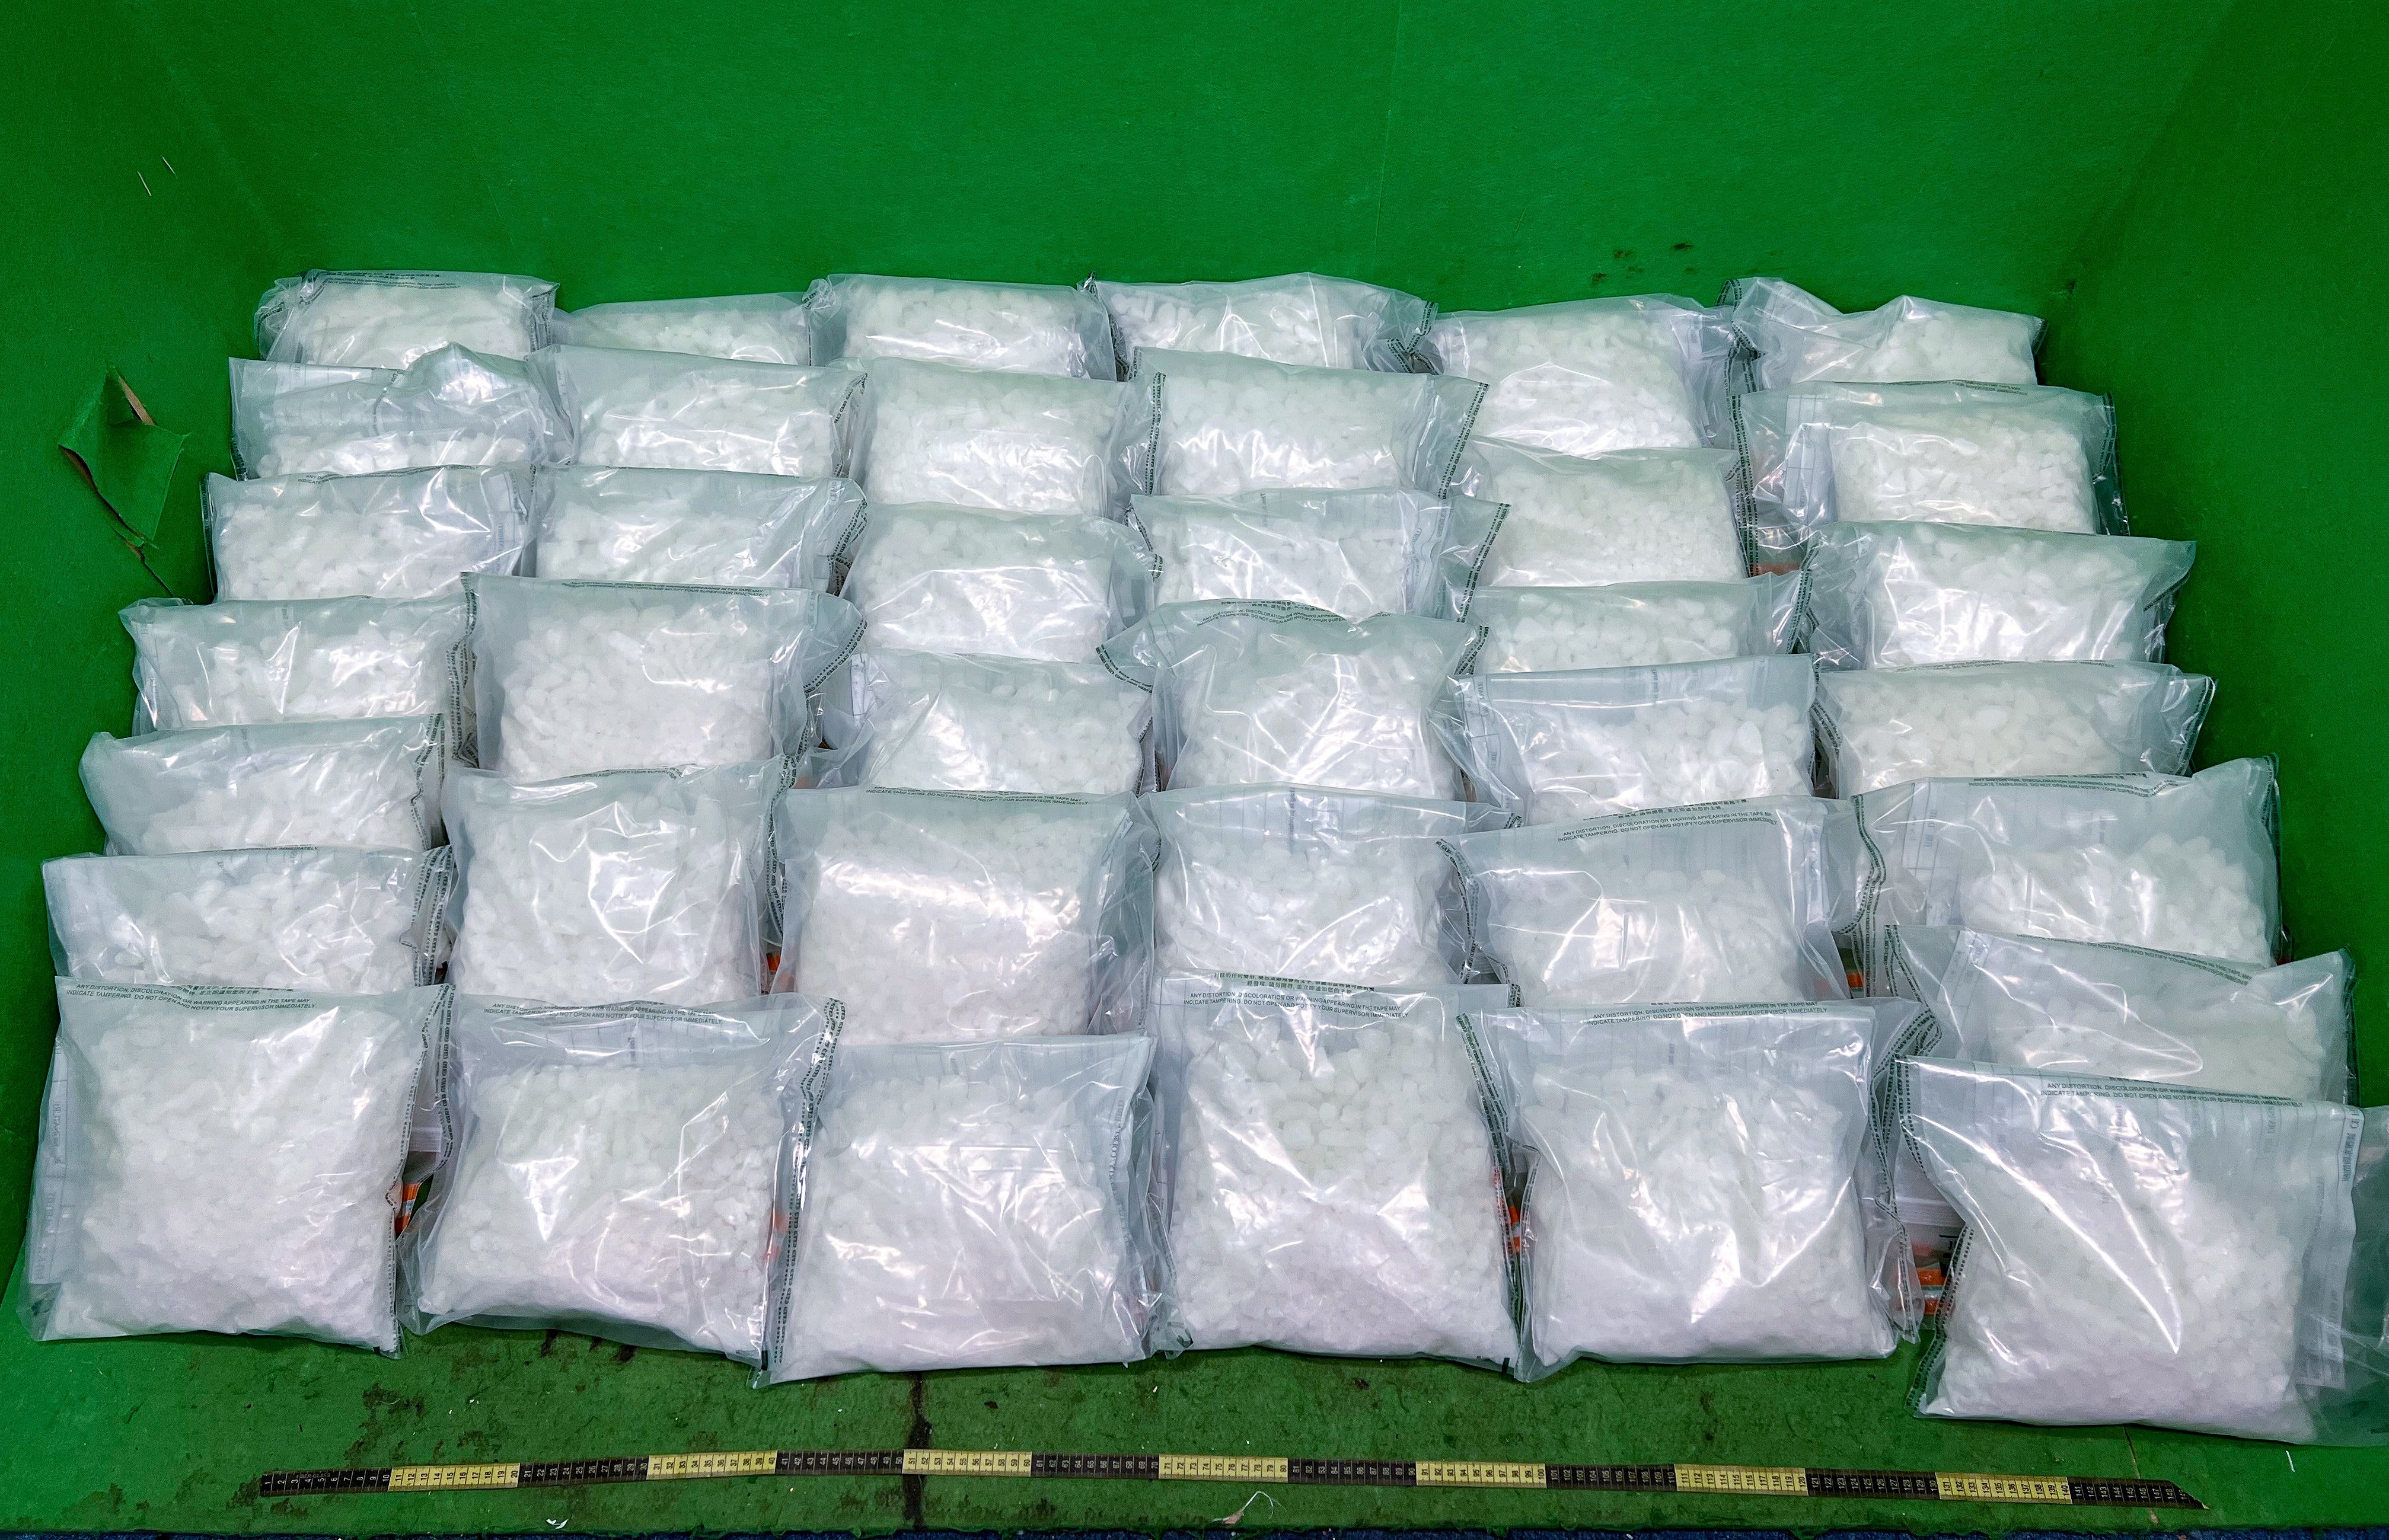 Authorities have seized about 129kg of ketamine from two air cargo shipments at Hong Kong International Airport. Photo: Handout